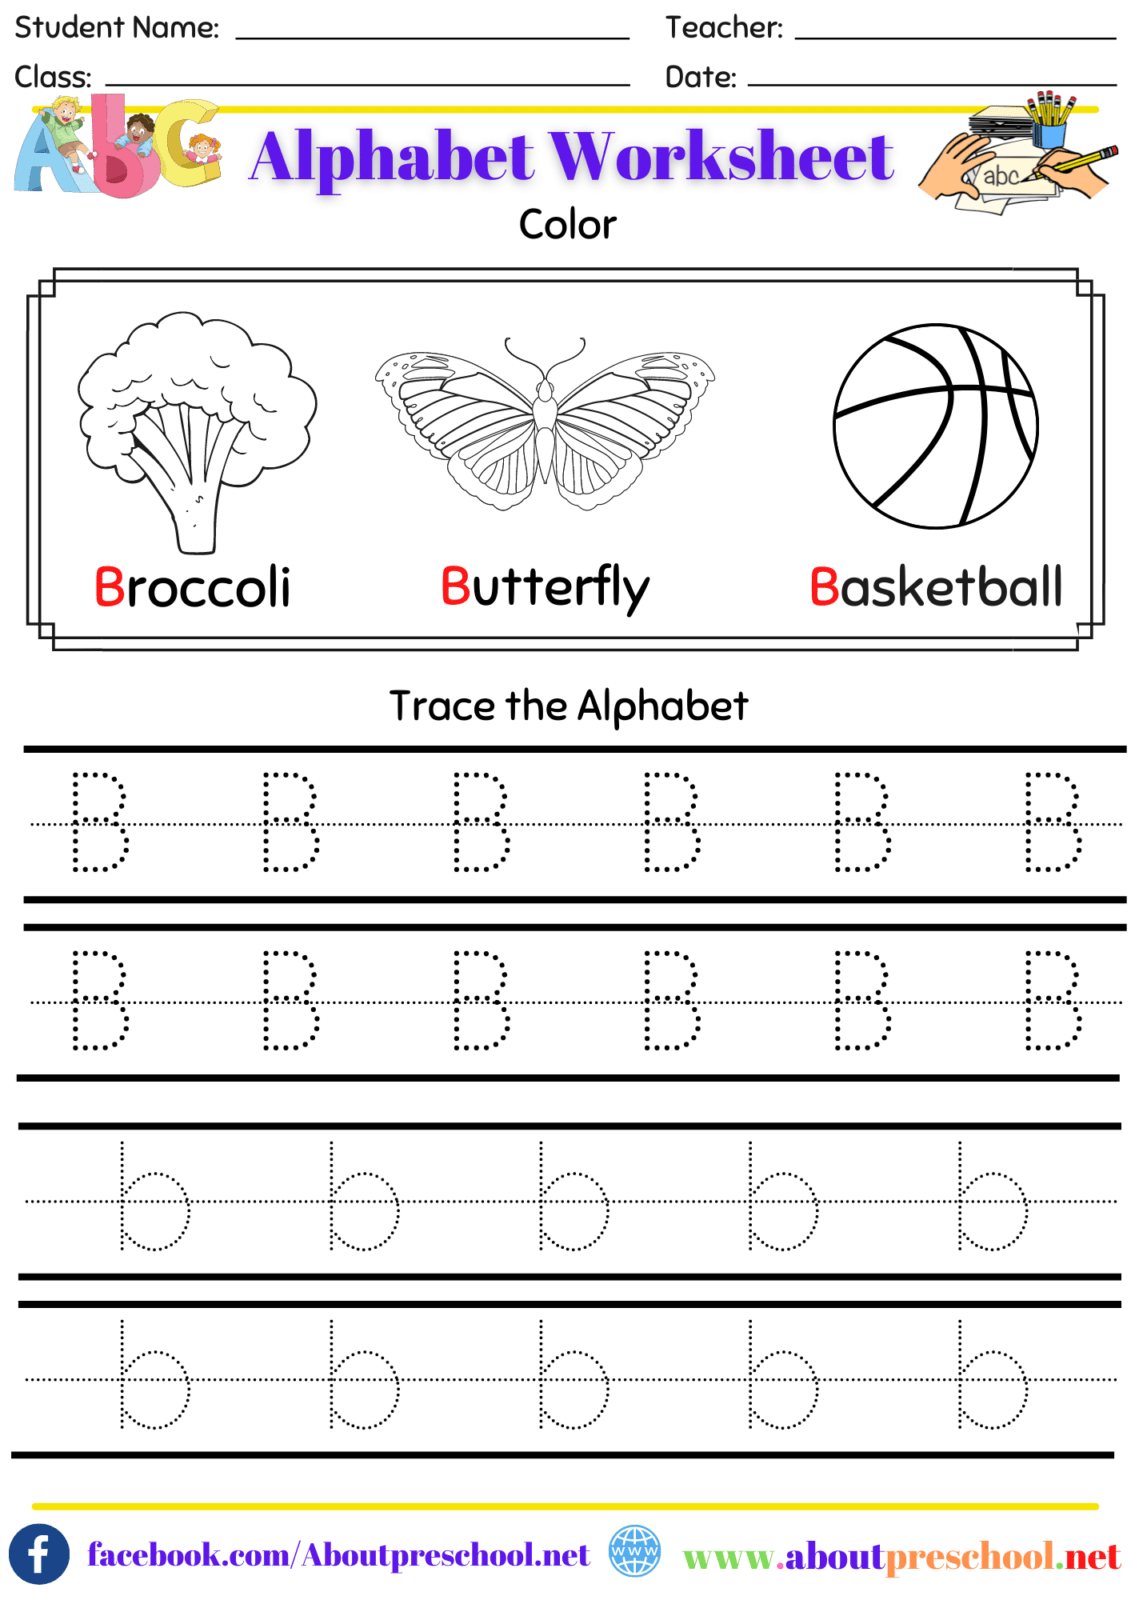 Alphabet Color and Trace Worksheet B